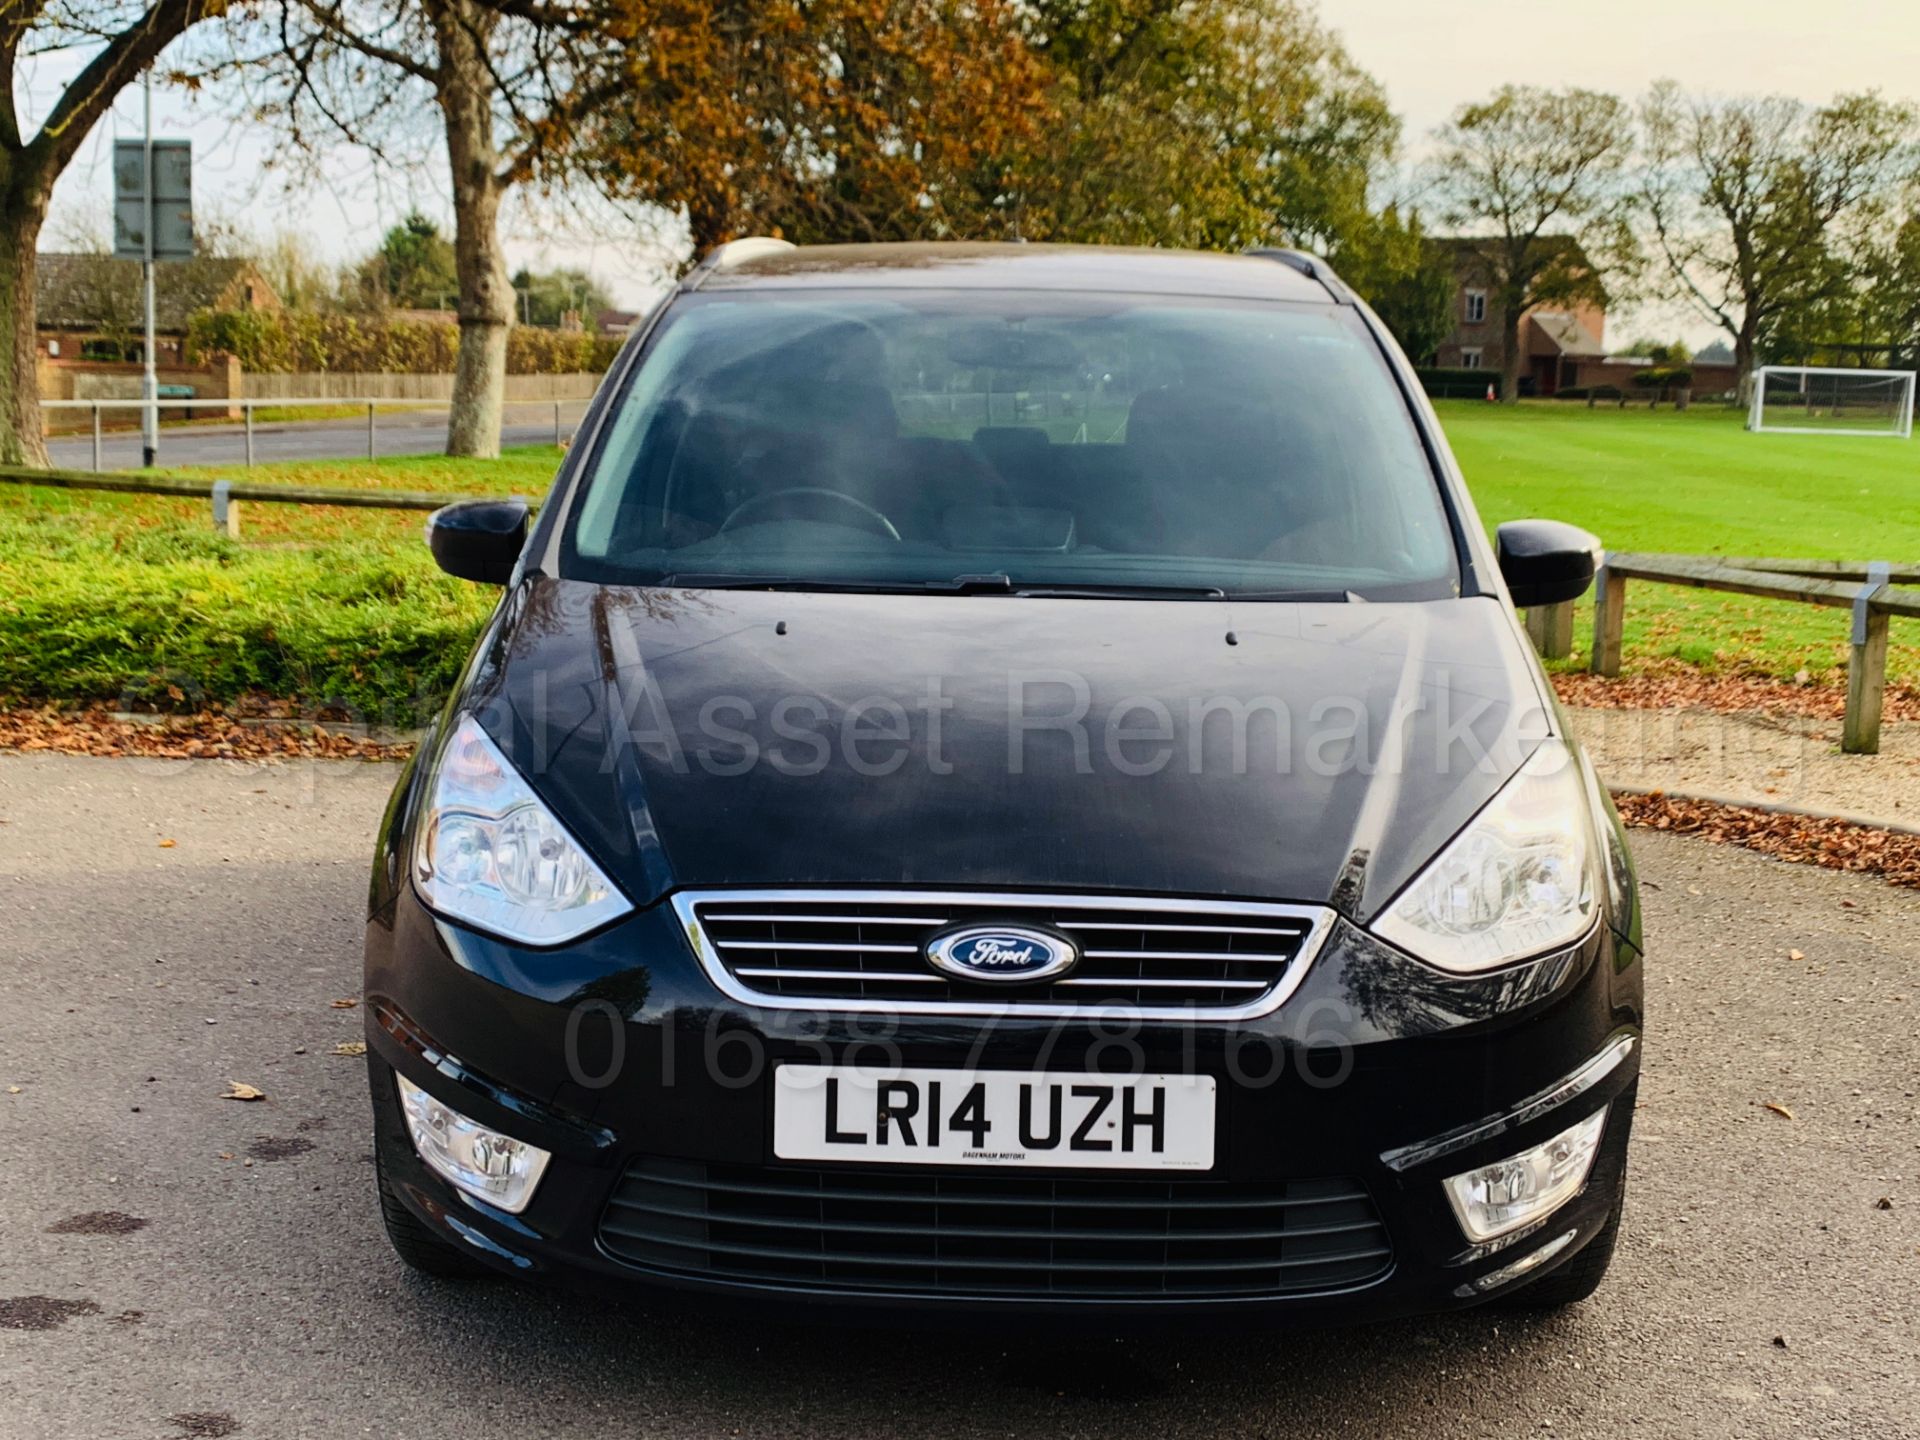 FORD GALAXY **ZETEC** 7 SEATER MPV (2014) 2.0 TDCI - 140 BHP - AUTO POWER SHIFT (1 OWNER) - Image 3 of 37